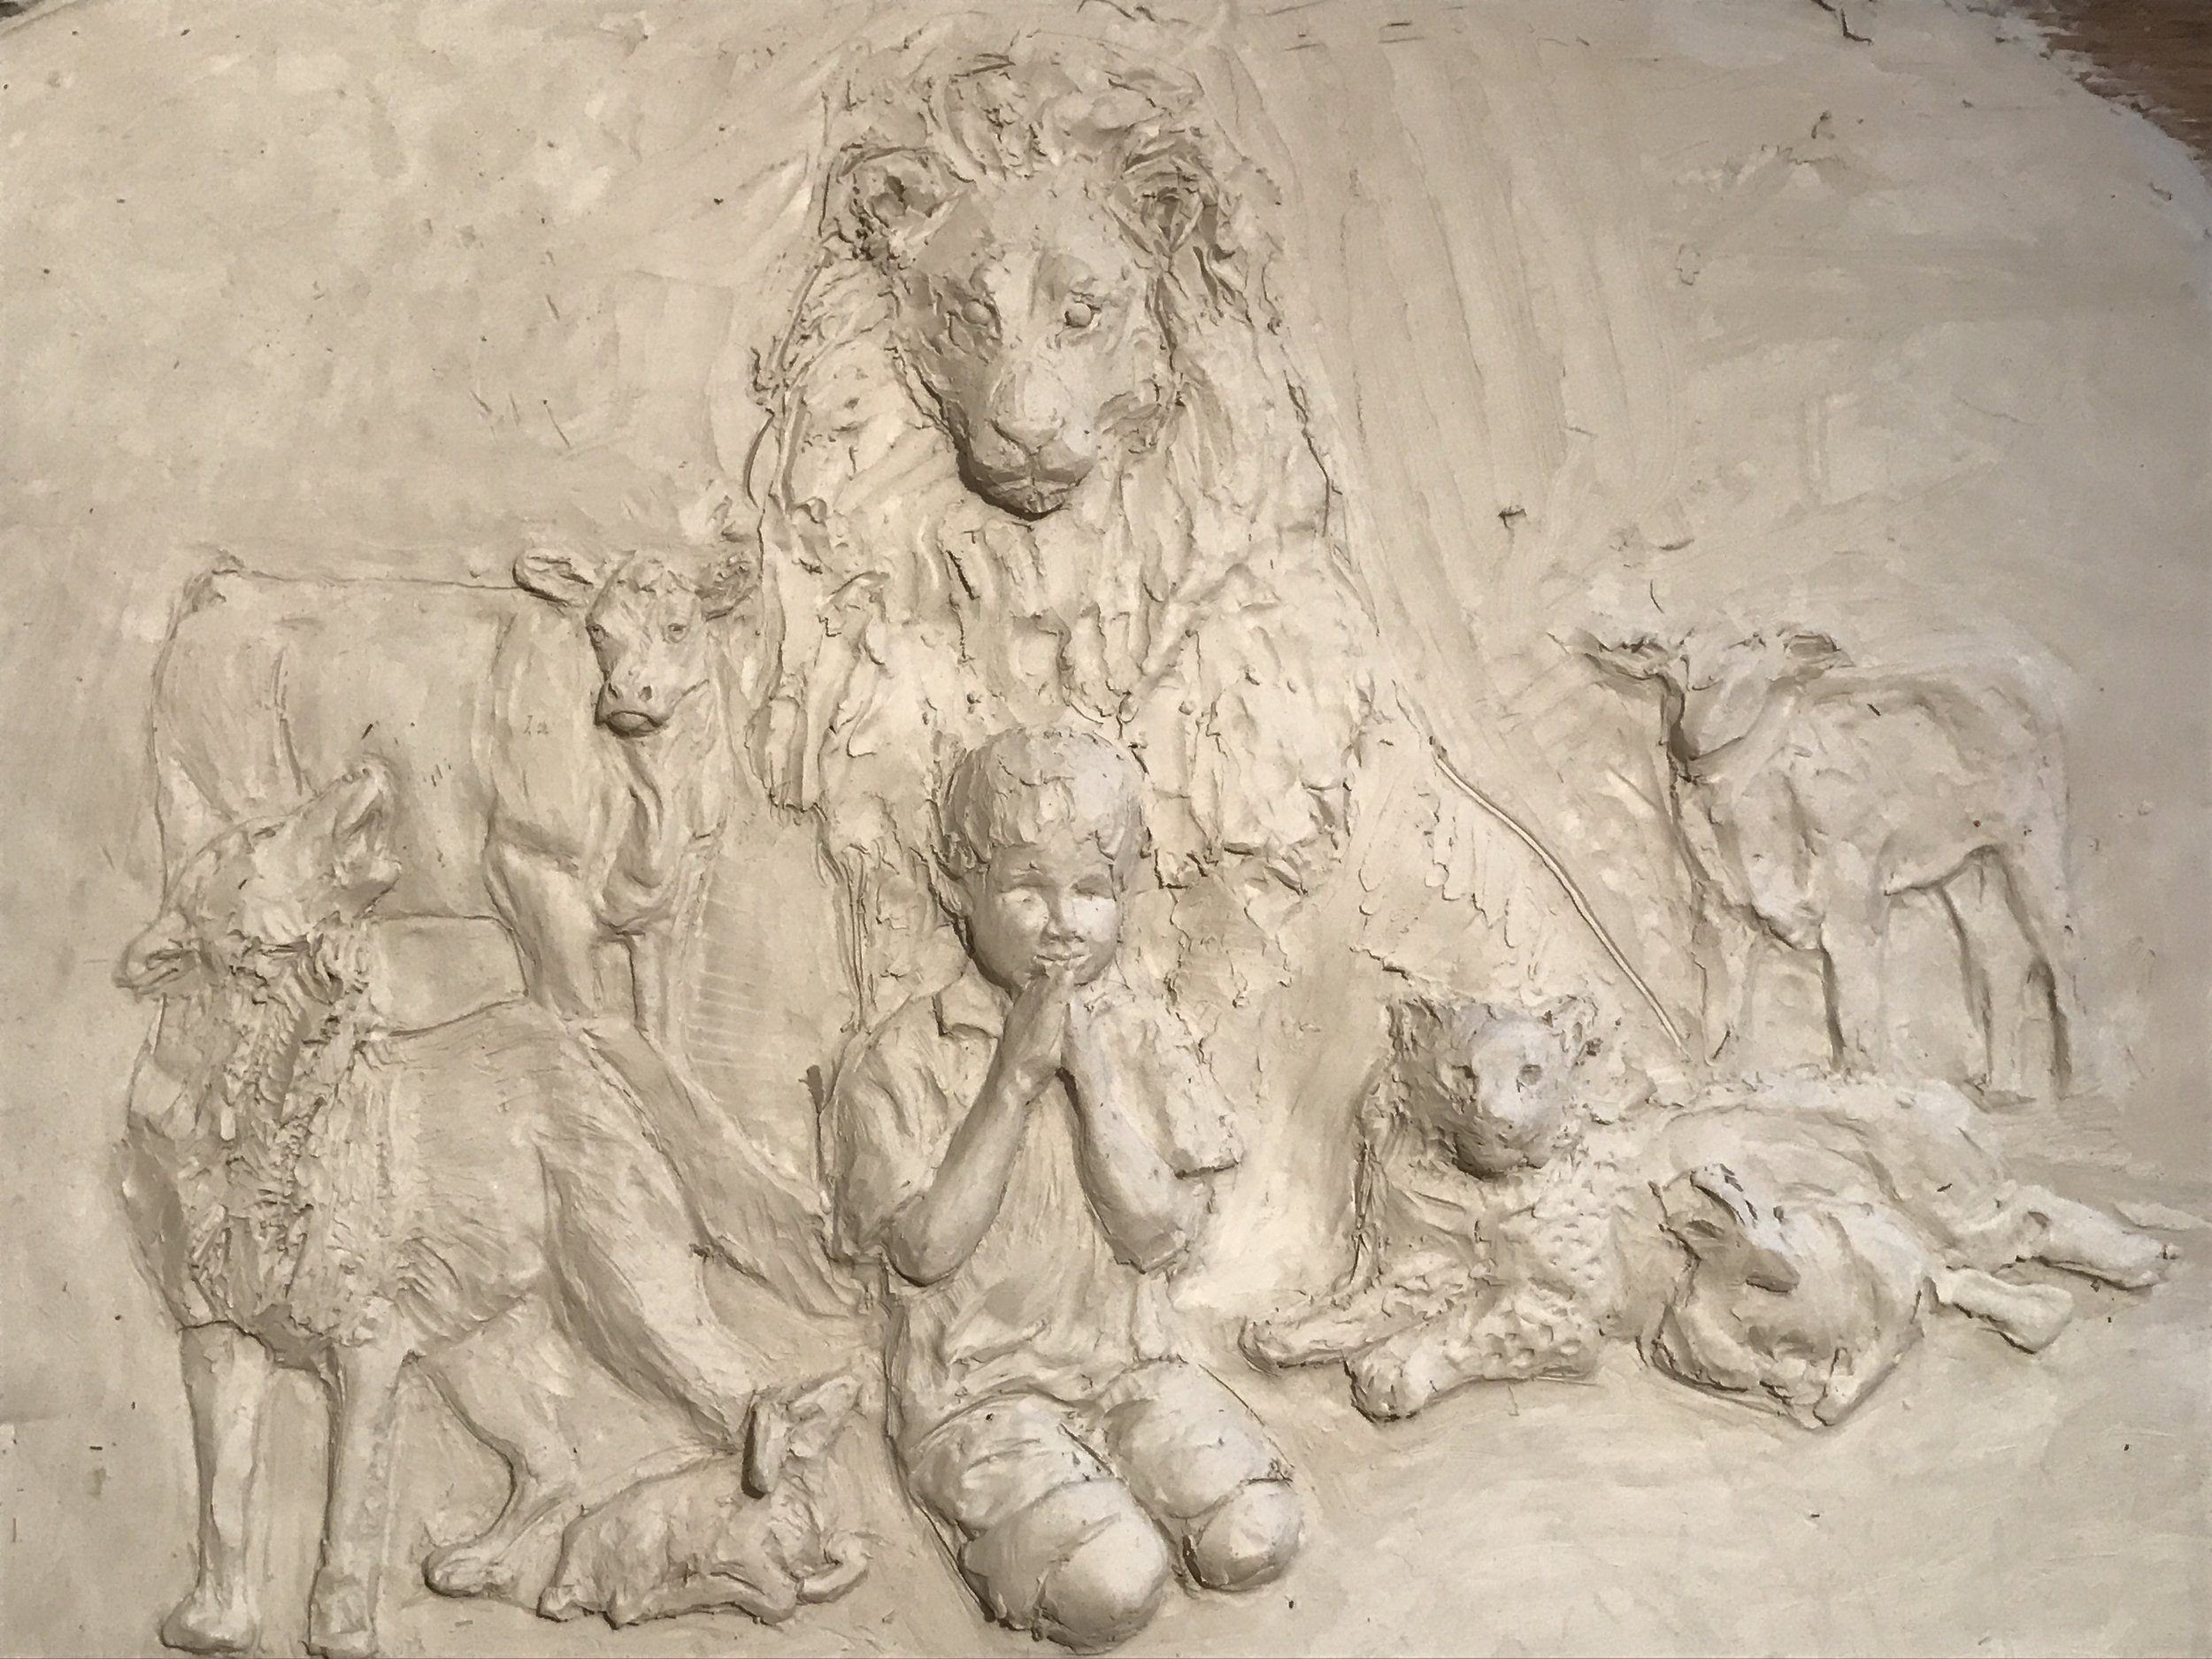  Bas relief in progress, "And a Child Shall Lead Them"; clay 